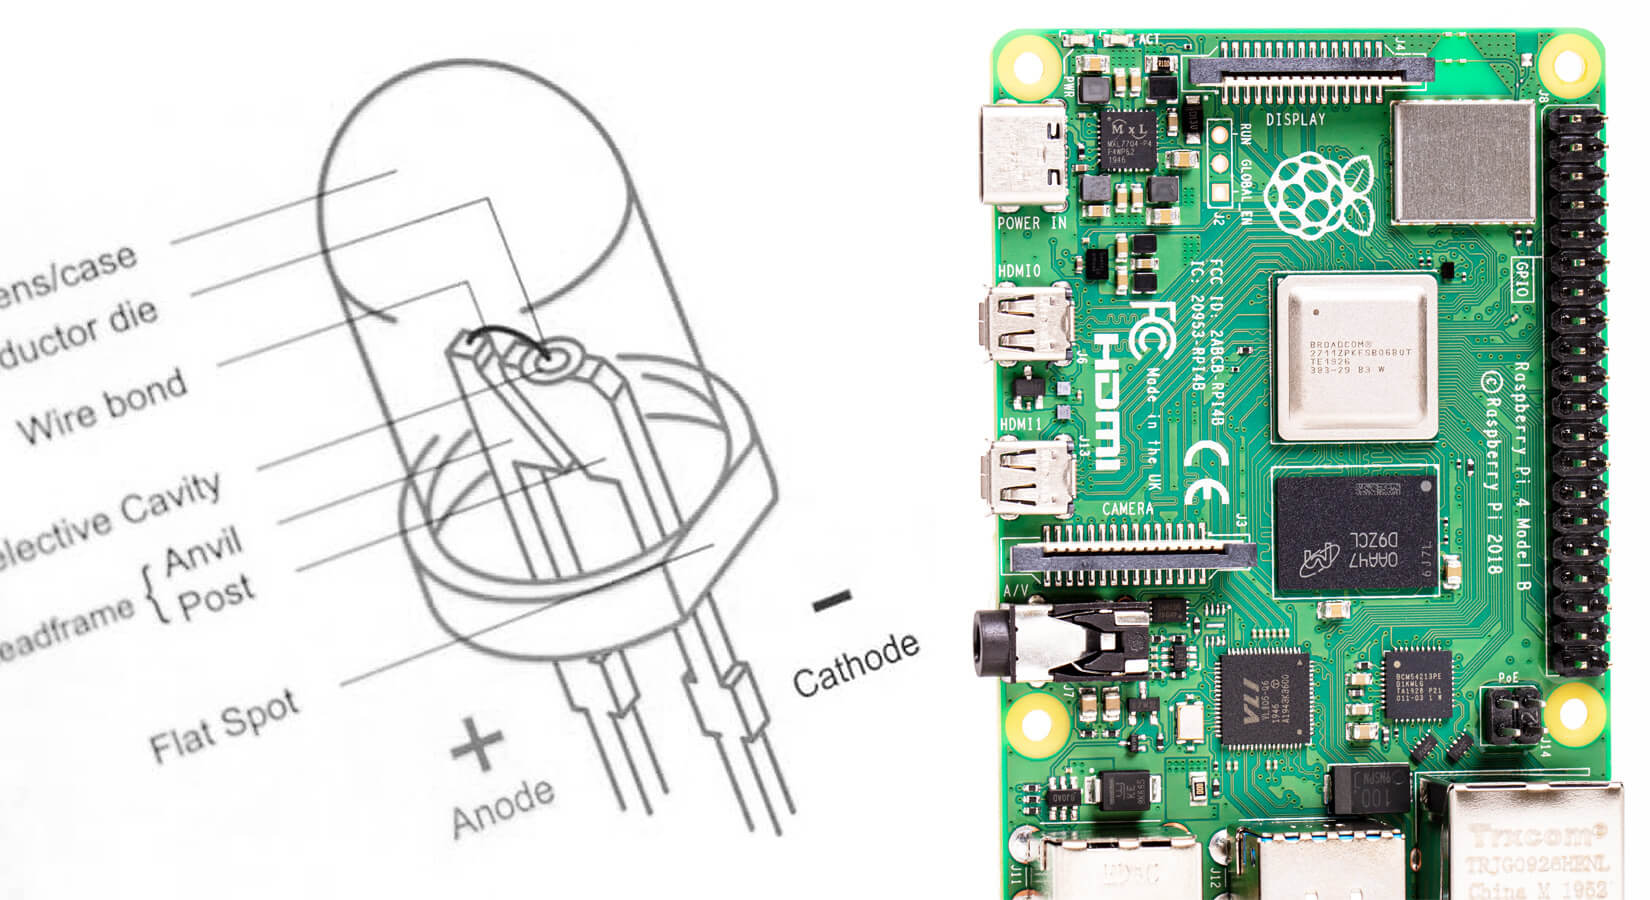 http://thepihut.com/cdn/shop/articles/Turning_on_an_LED_with_your_Raspberry_Pis_GPIO_Pins_1.jpg?v=1683709190&width=2048